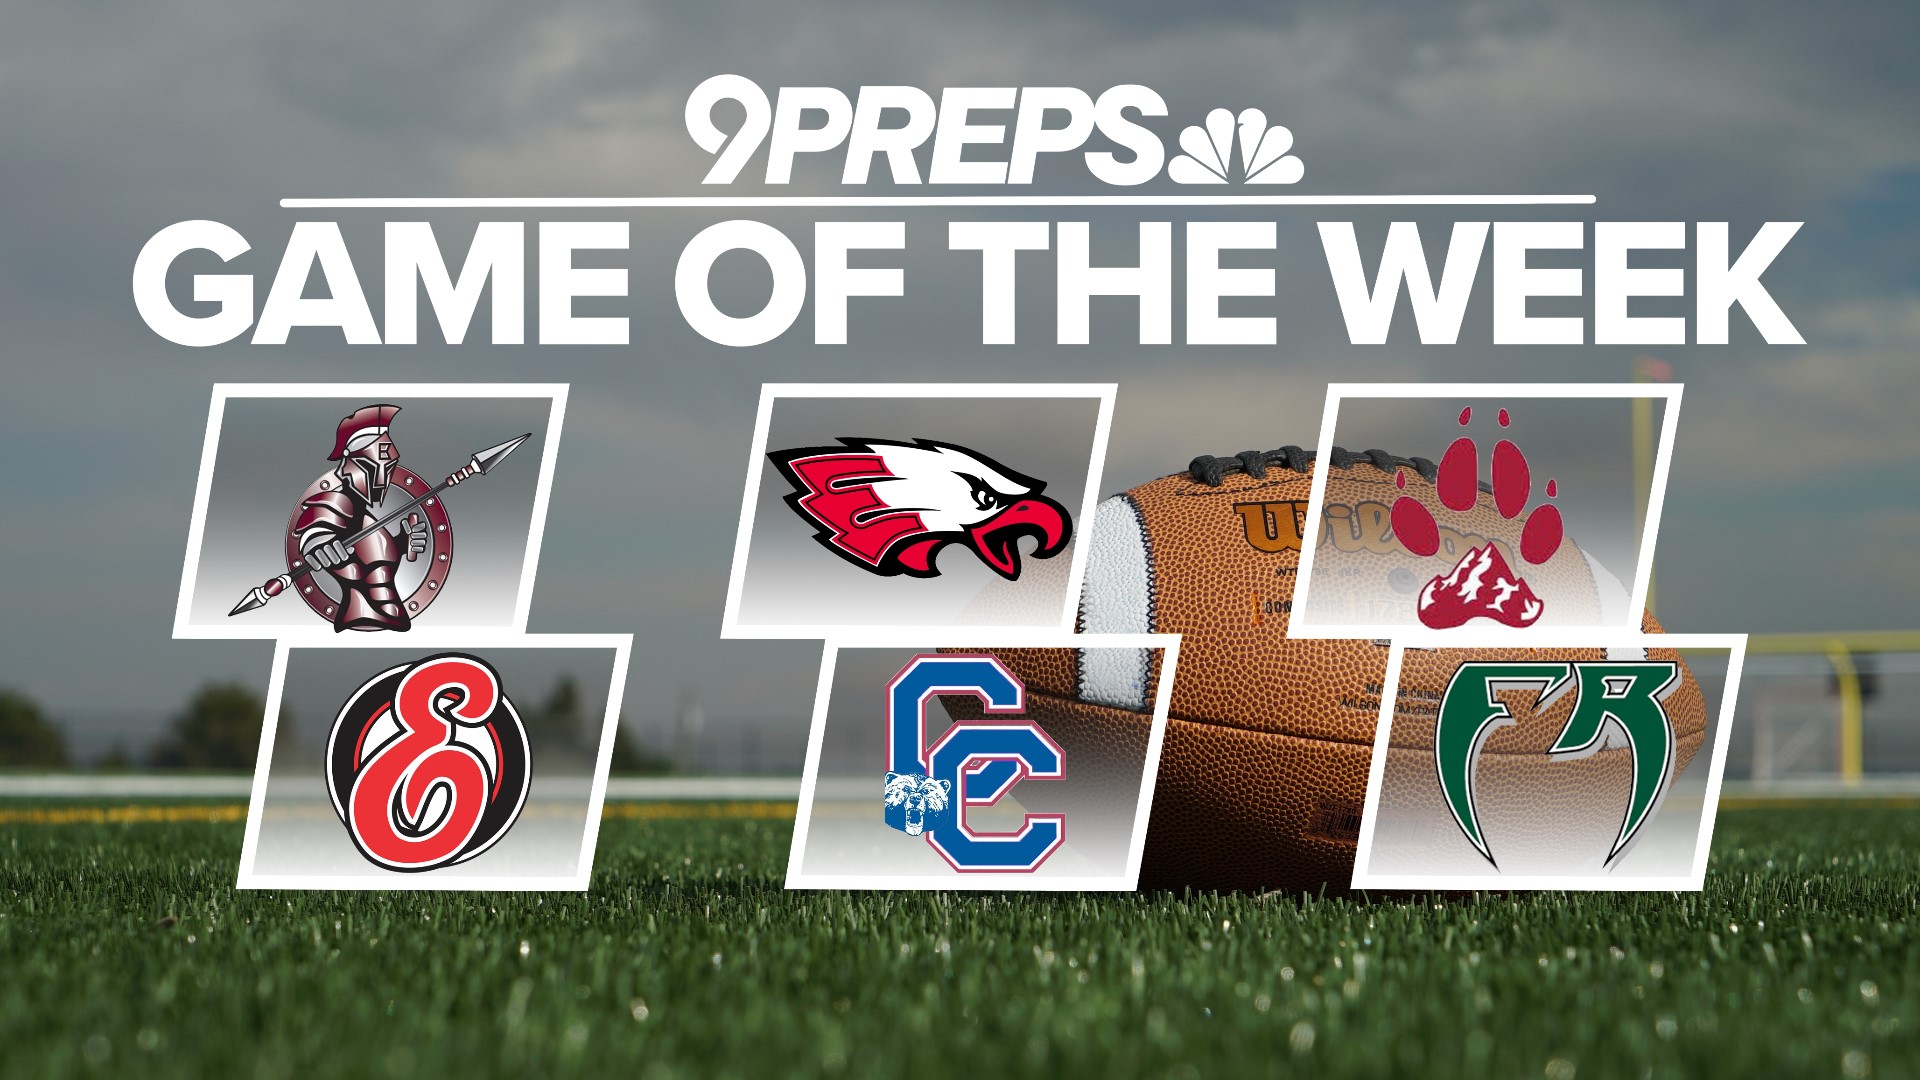 The 9Preps Game of the Week is back! Vote to determine which high school football game we showcase on Friday, Oct. 14.